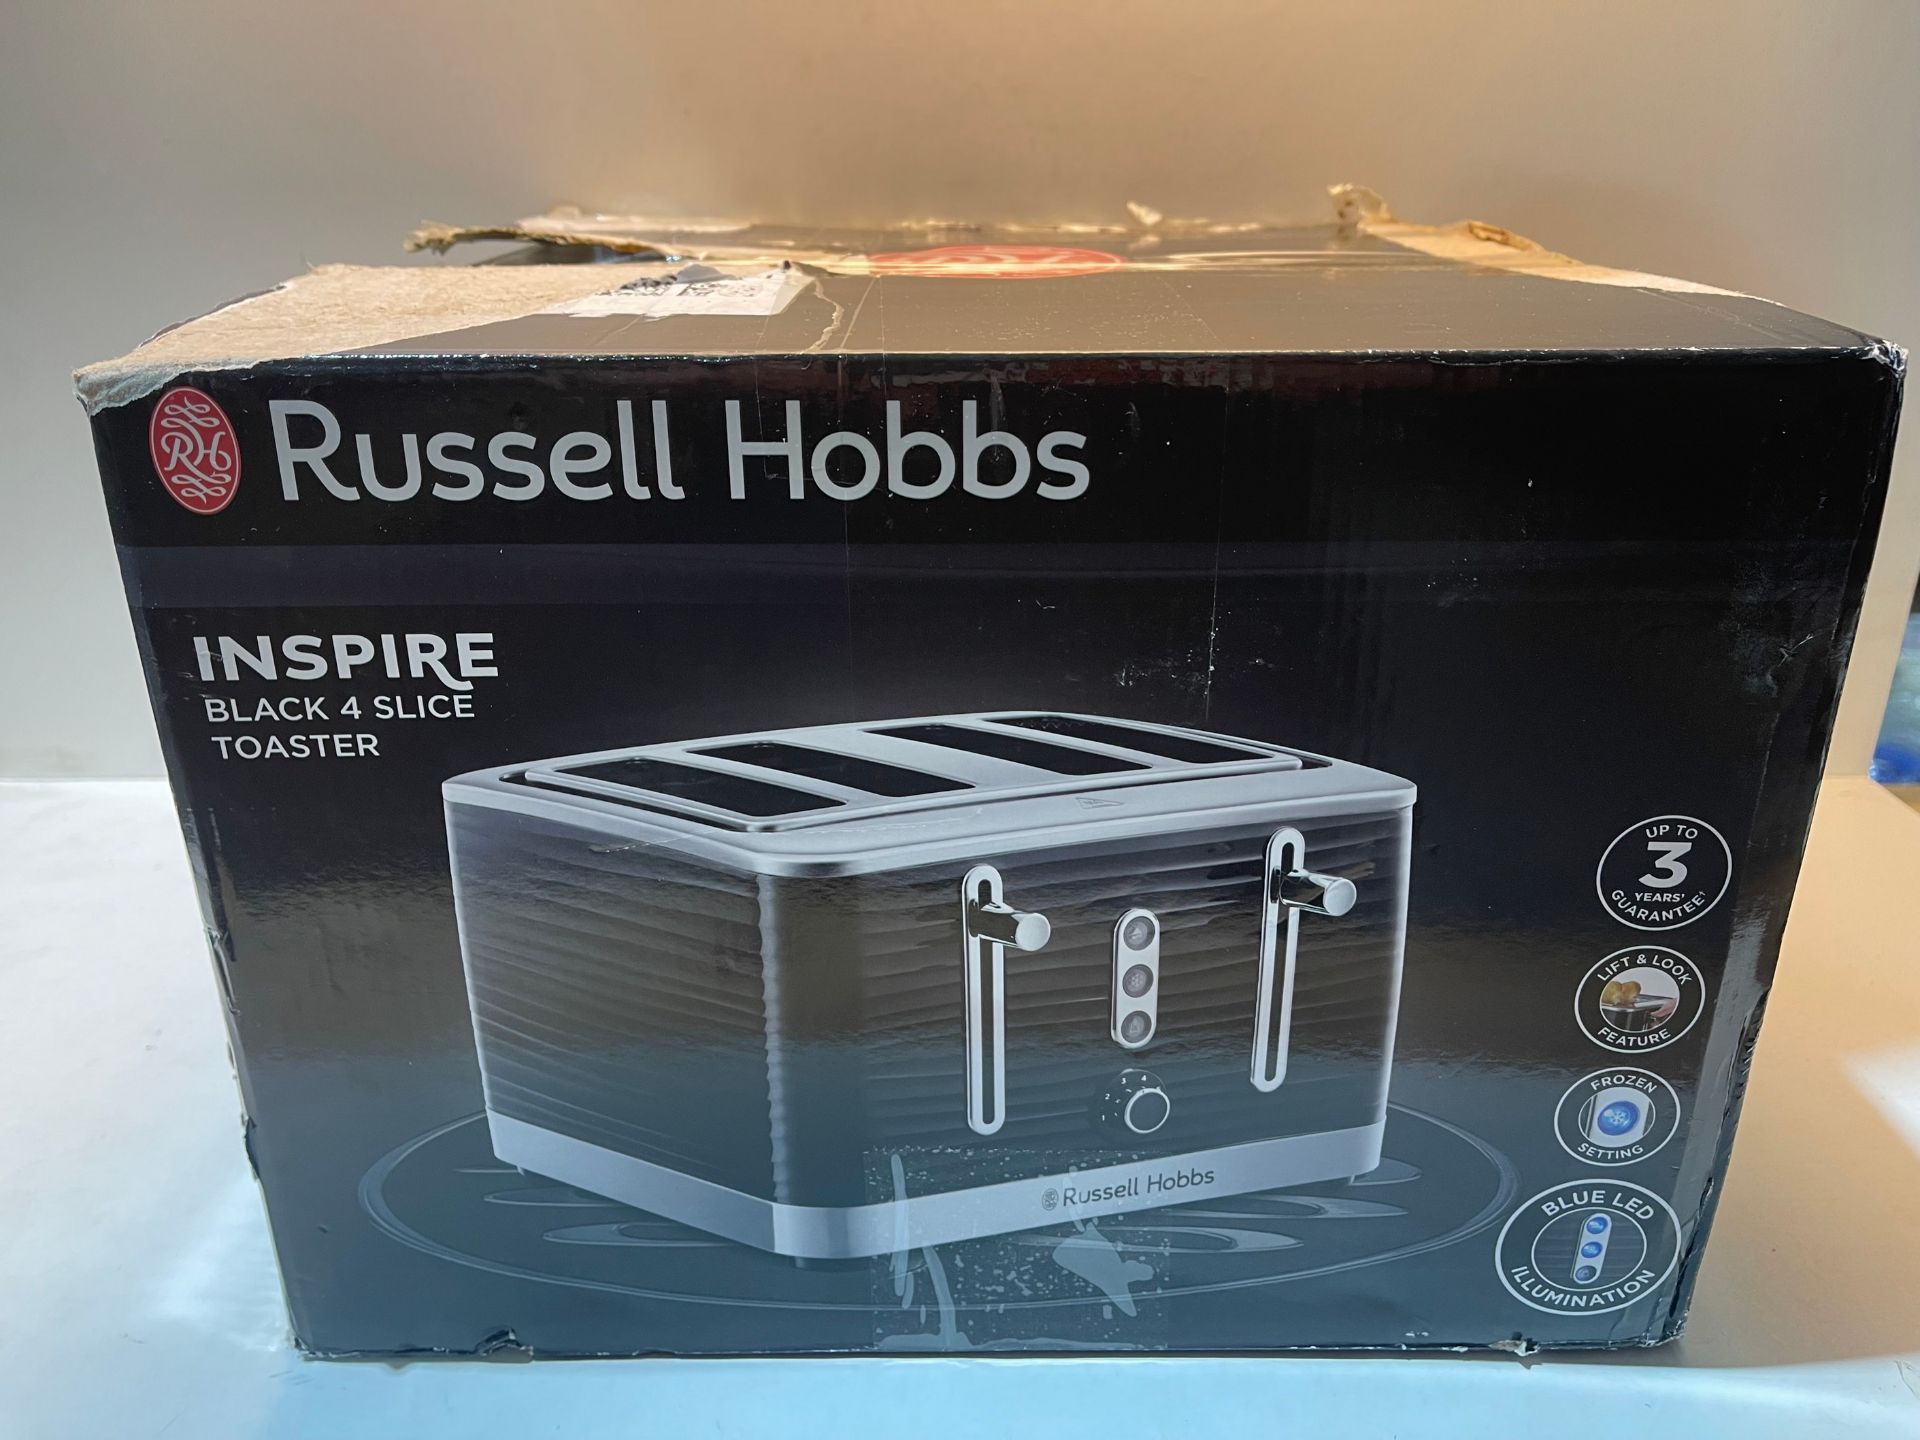 Russell Hobbs 24381 Inspire High Gloss Plastic Four Slice Toaster, Black Â£39.99Condition